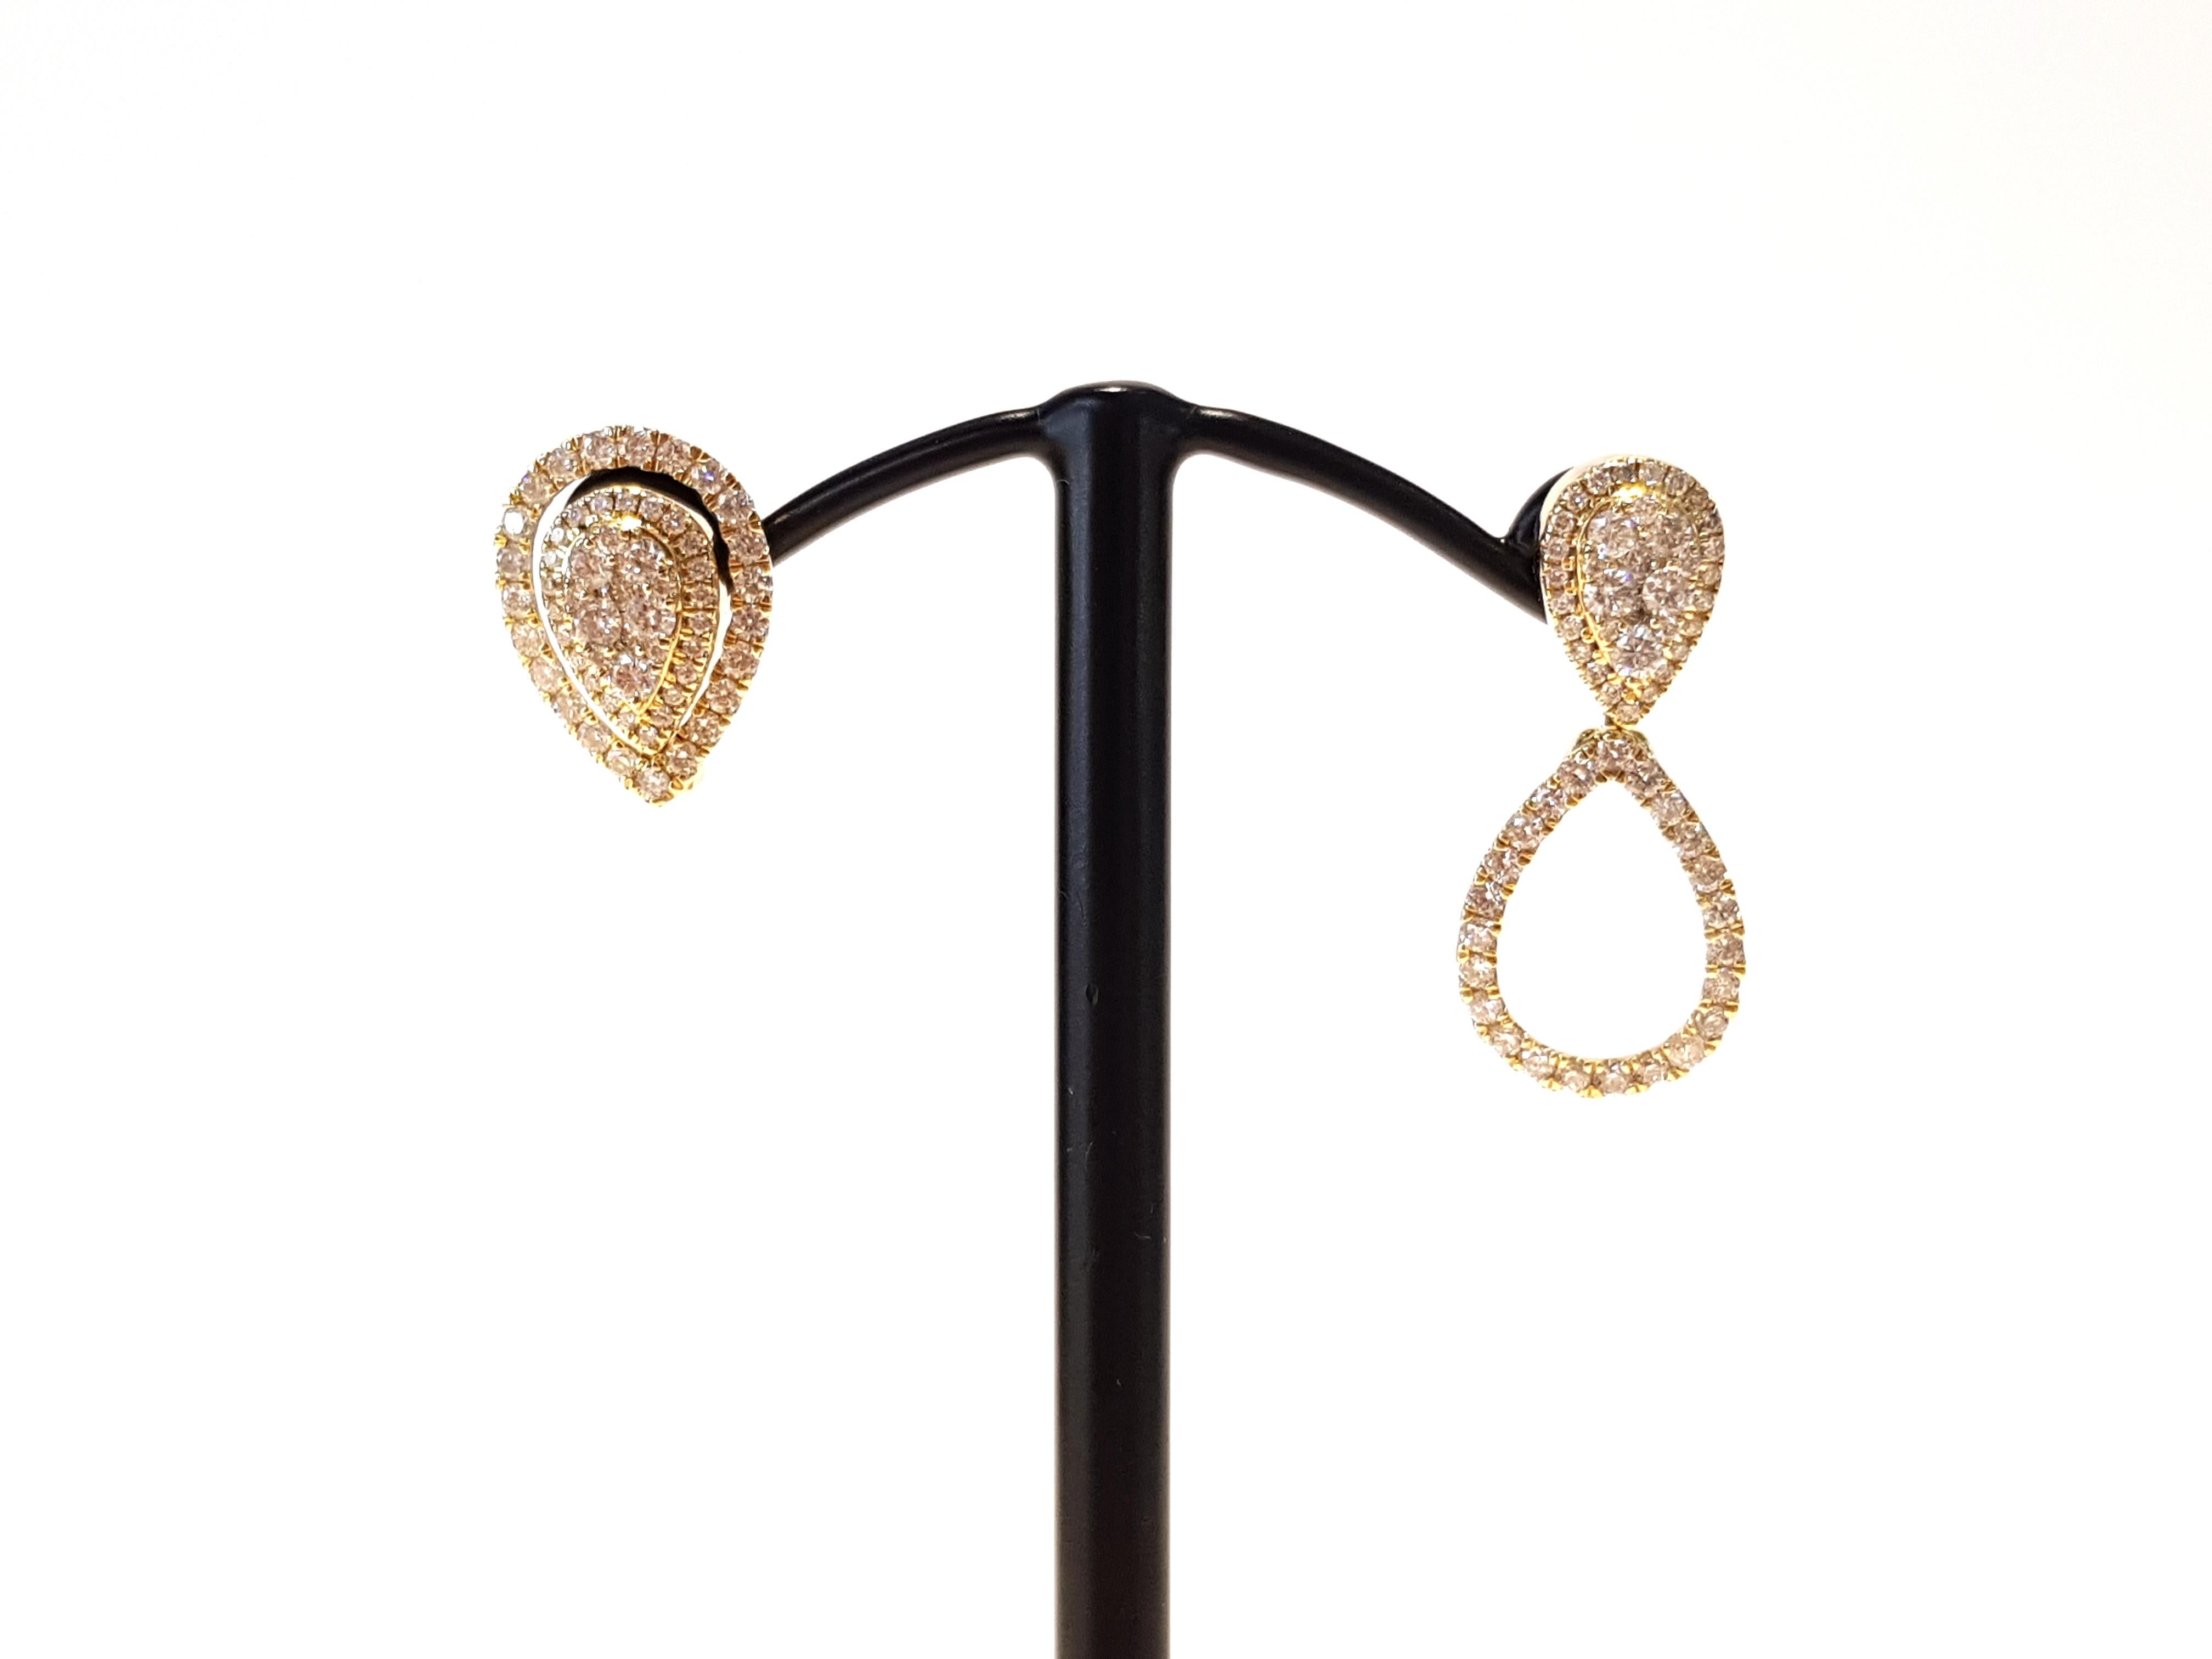 A striking set of interchangeable pear shaped earrings beautifully set in 18K yellow gold. 0.90ct of round brilliant diamonds illuminate these precious earrings that change from studs to drop earrings.  The weight of these earrings are 3.7g. These